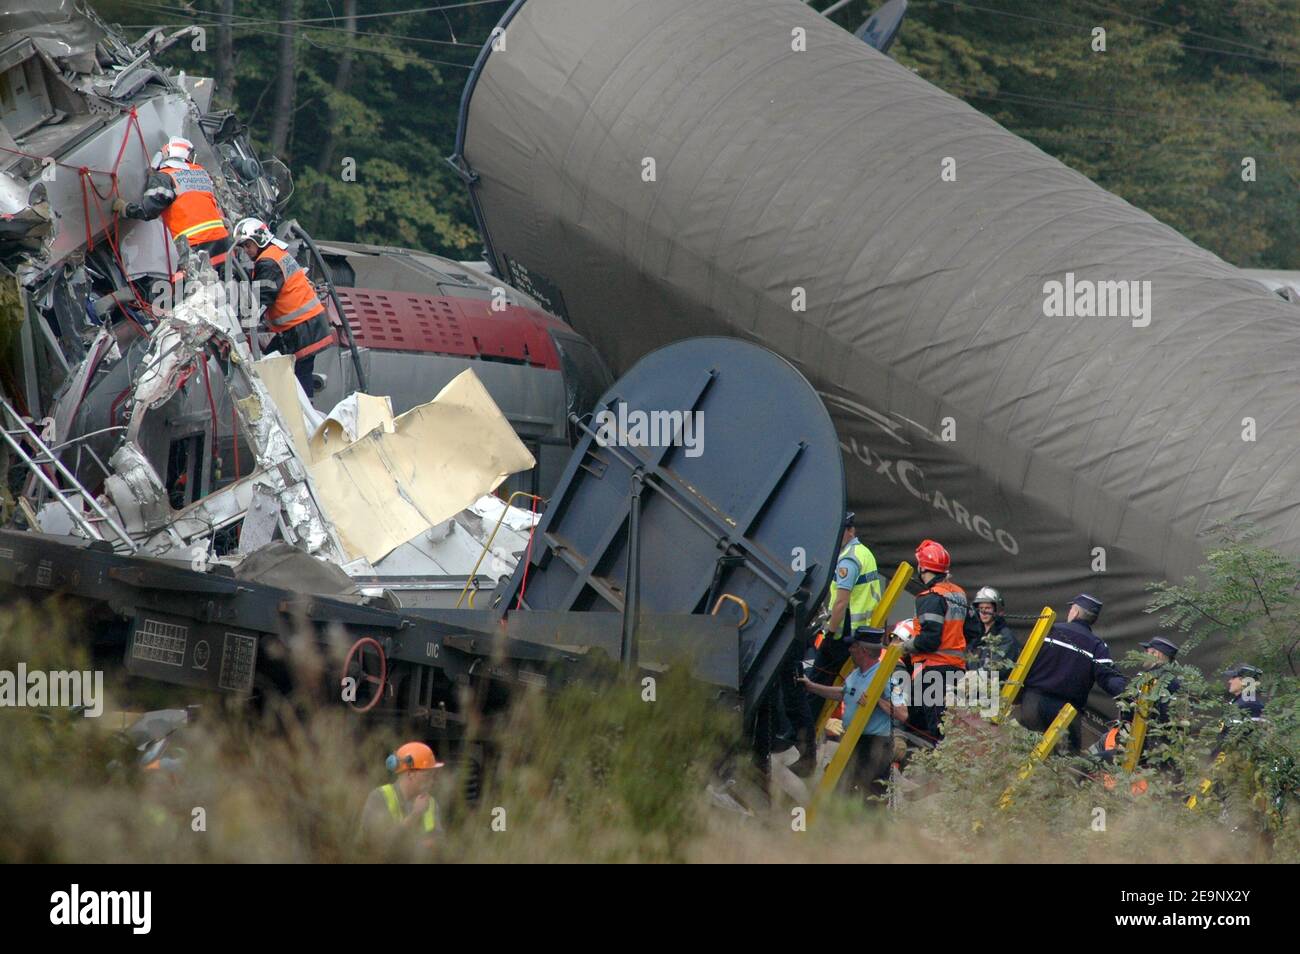 At least 5 people were killed and more than 20 injured people in a head-on collision between a passenger train and a goods train in Zoufftgen, France on October 11, 2006. The two trains were a double-decker Luxembourg-operated regional express train travelling from the grand duchy to the French city of Nancy, and a freight train heading for Luxembourg. French Prime minister Dominique de Villepin and Jean-Claude Juncker, Prime Minister of Luxembourg arrived later on the spot of this tragedy. Photo by Pierre Rebondy/ABACAPRESS.COM Stock Photo